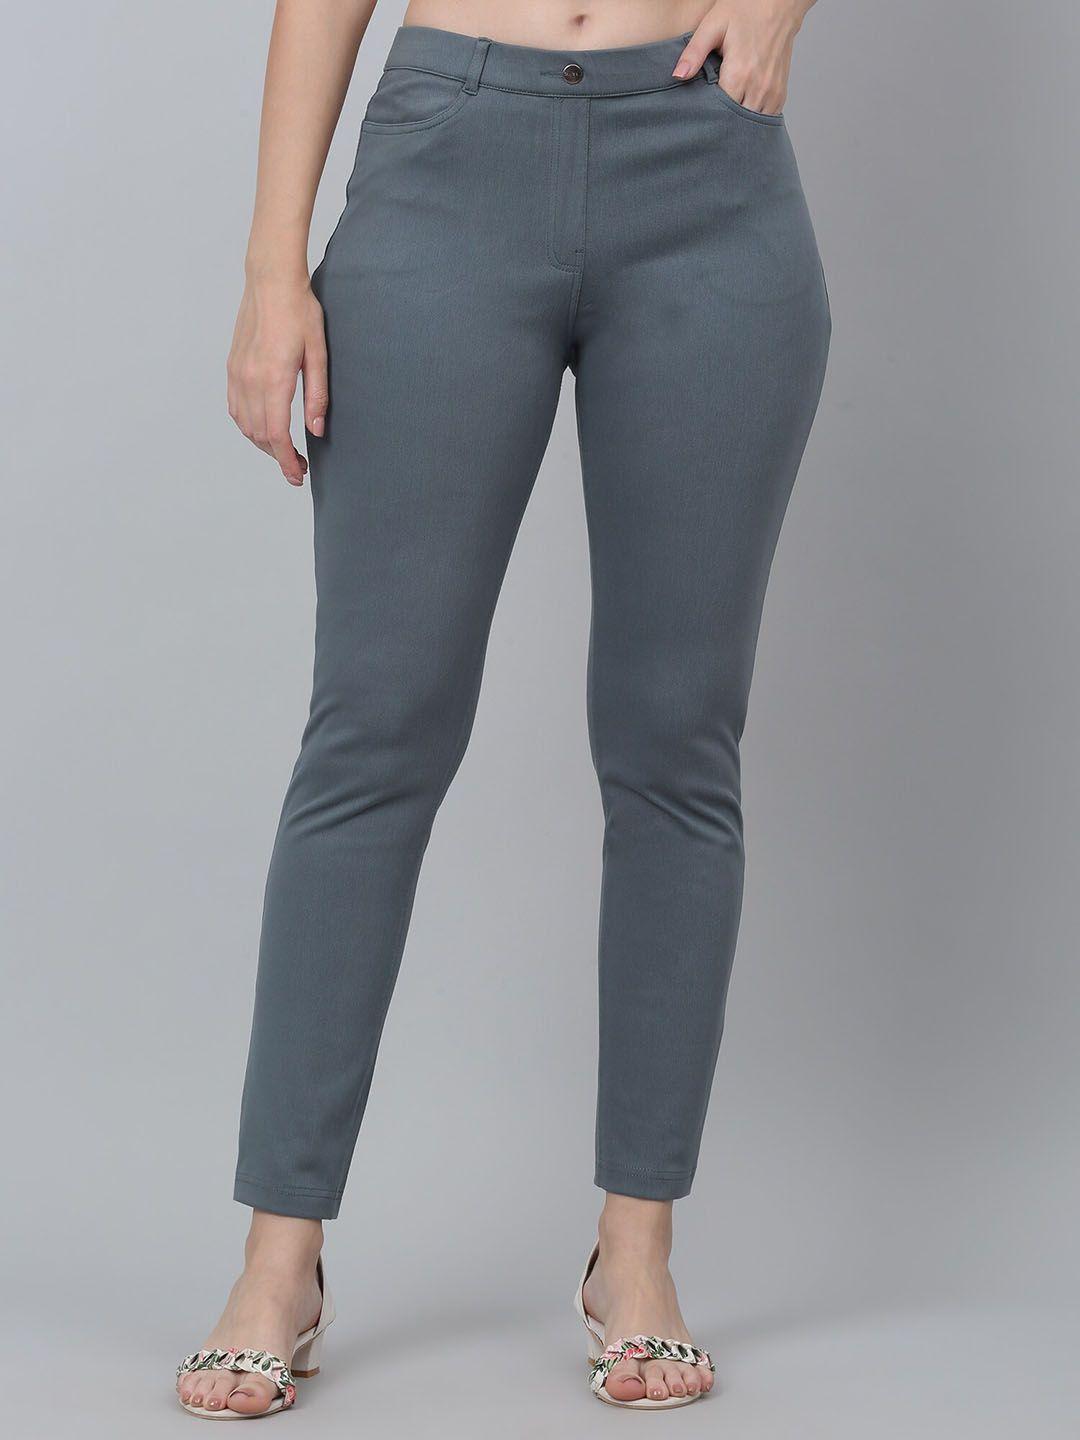 cantabil-cotton-mid-rise-regular-fit-jeggings